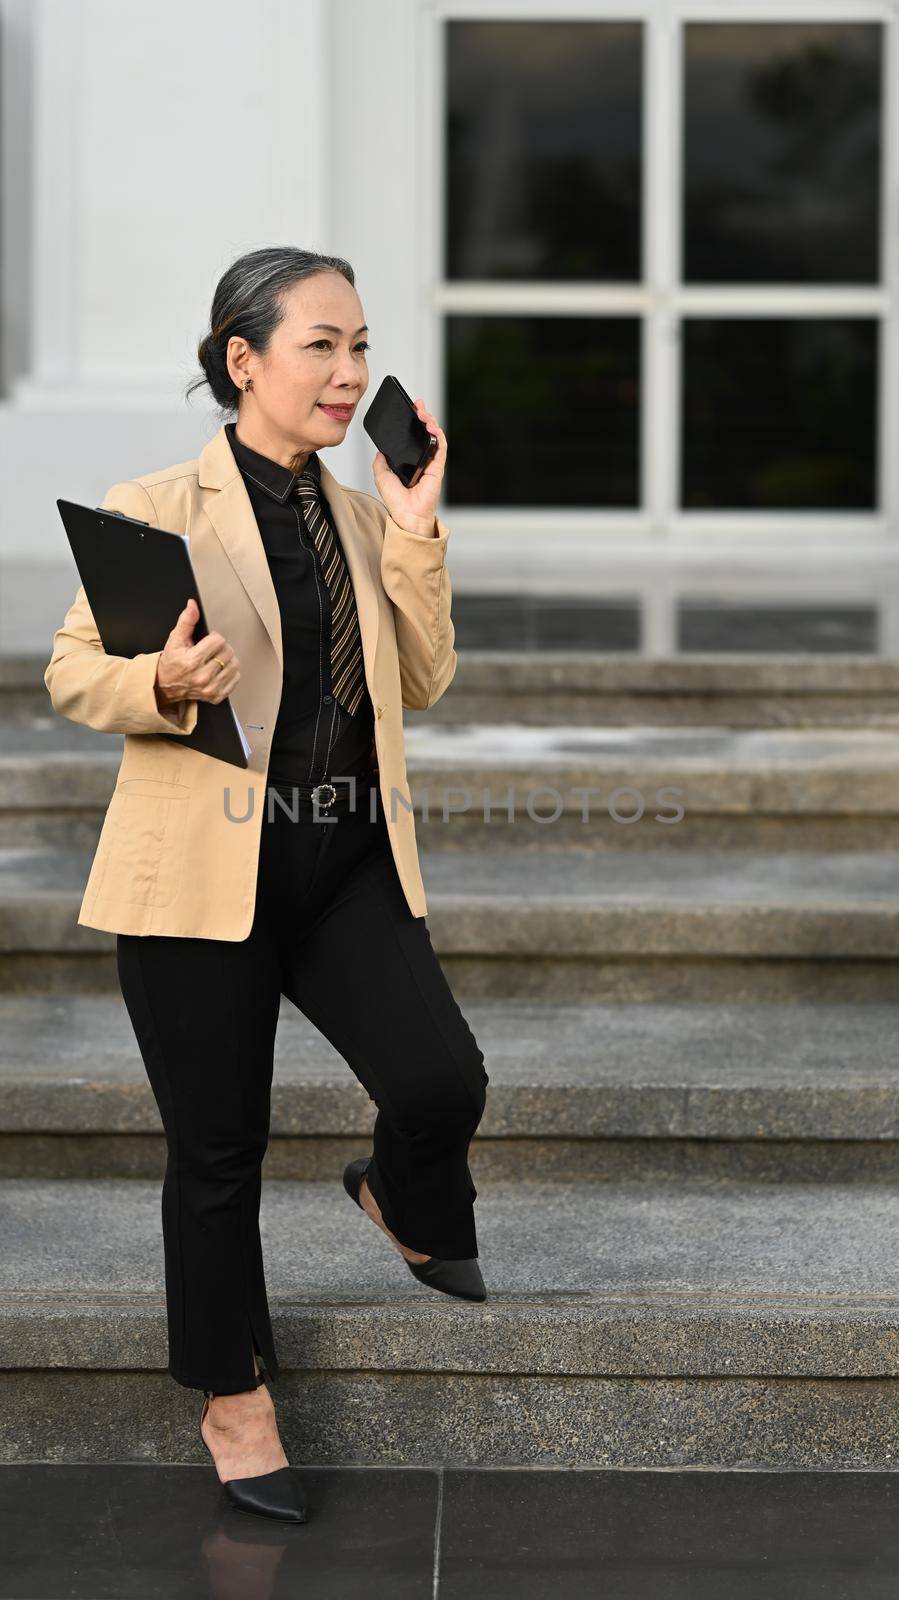 Full length portrait of mature businesswoman talking on cell phone and standing in front of an office building by prathanchorruangsak